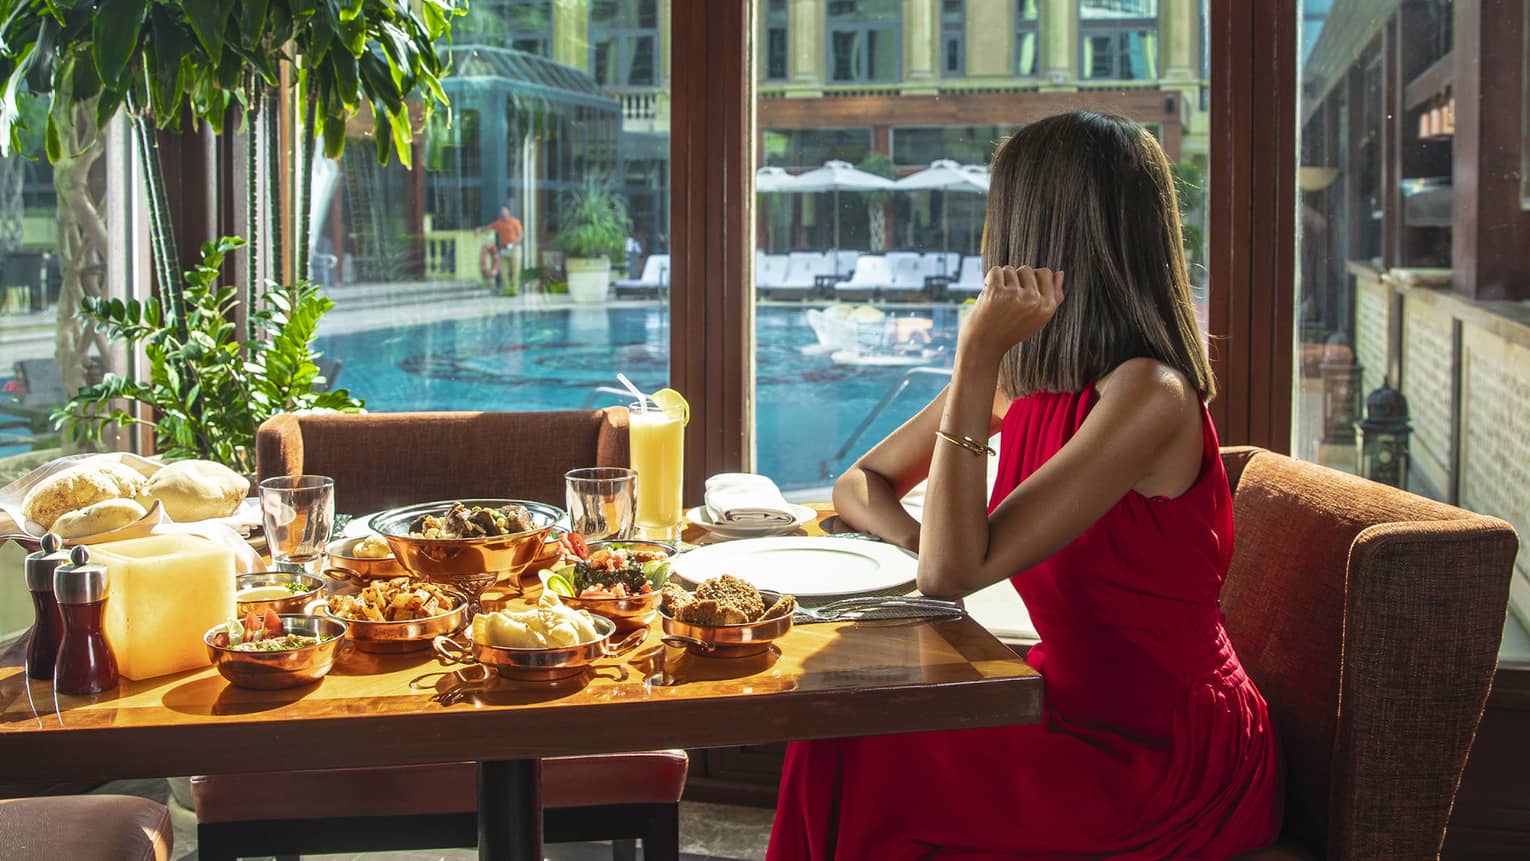 A woman in a long red dress sits at a table with a variety of food next to a long window overlooking a pool